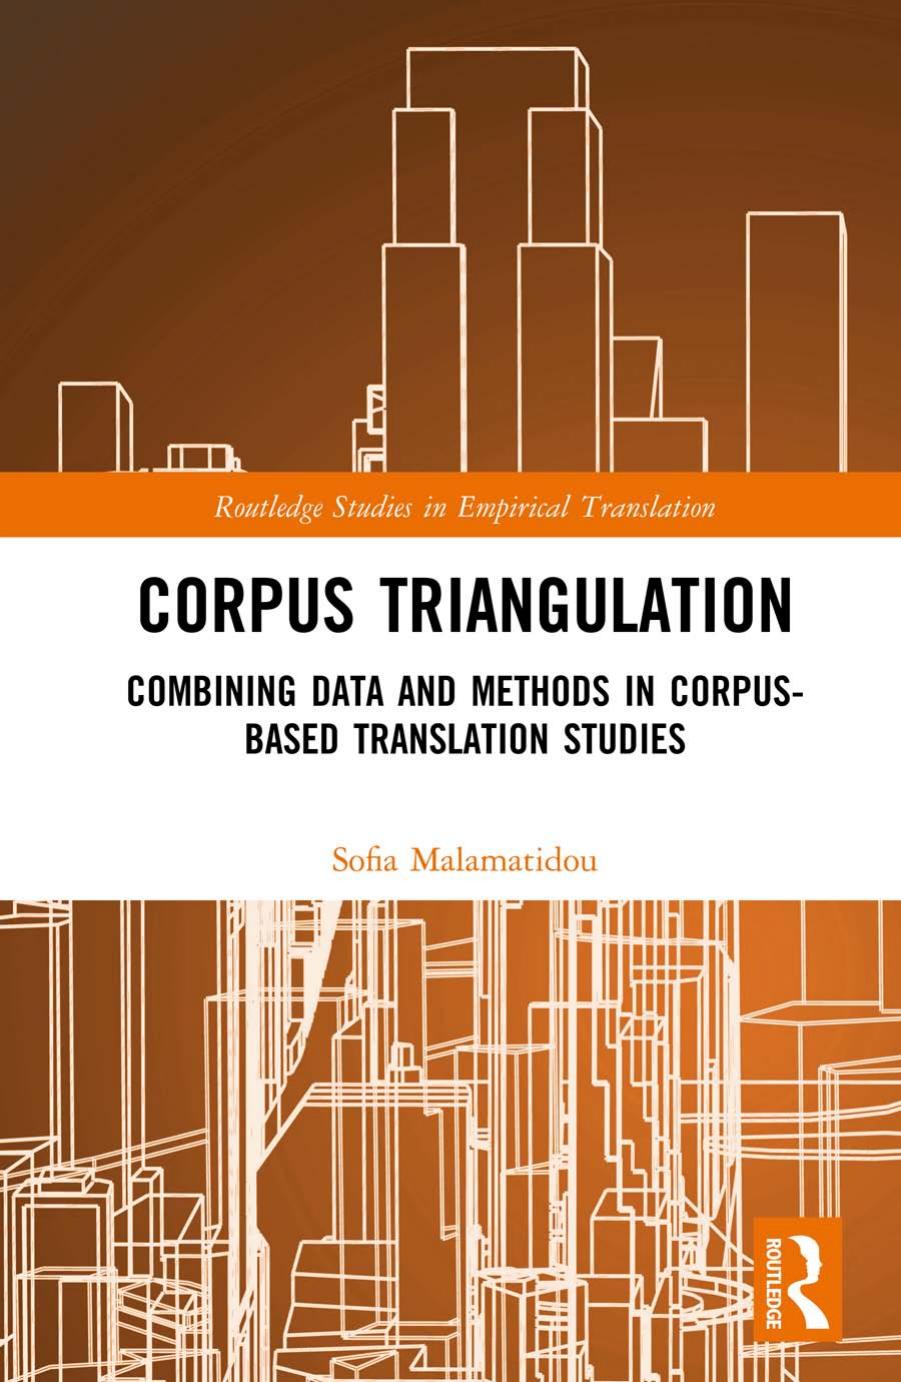 Corpus Triangulation: The Combined Use of Corpora in Translation Studies